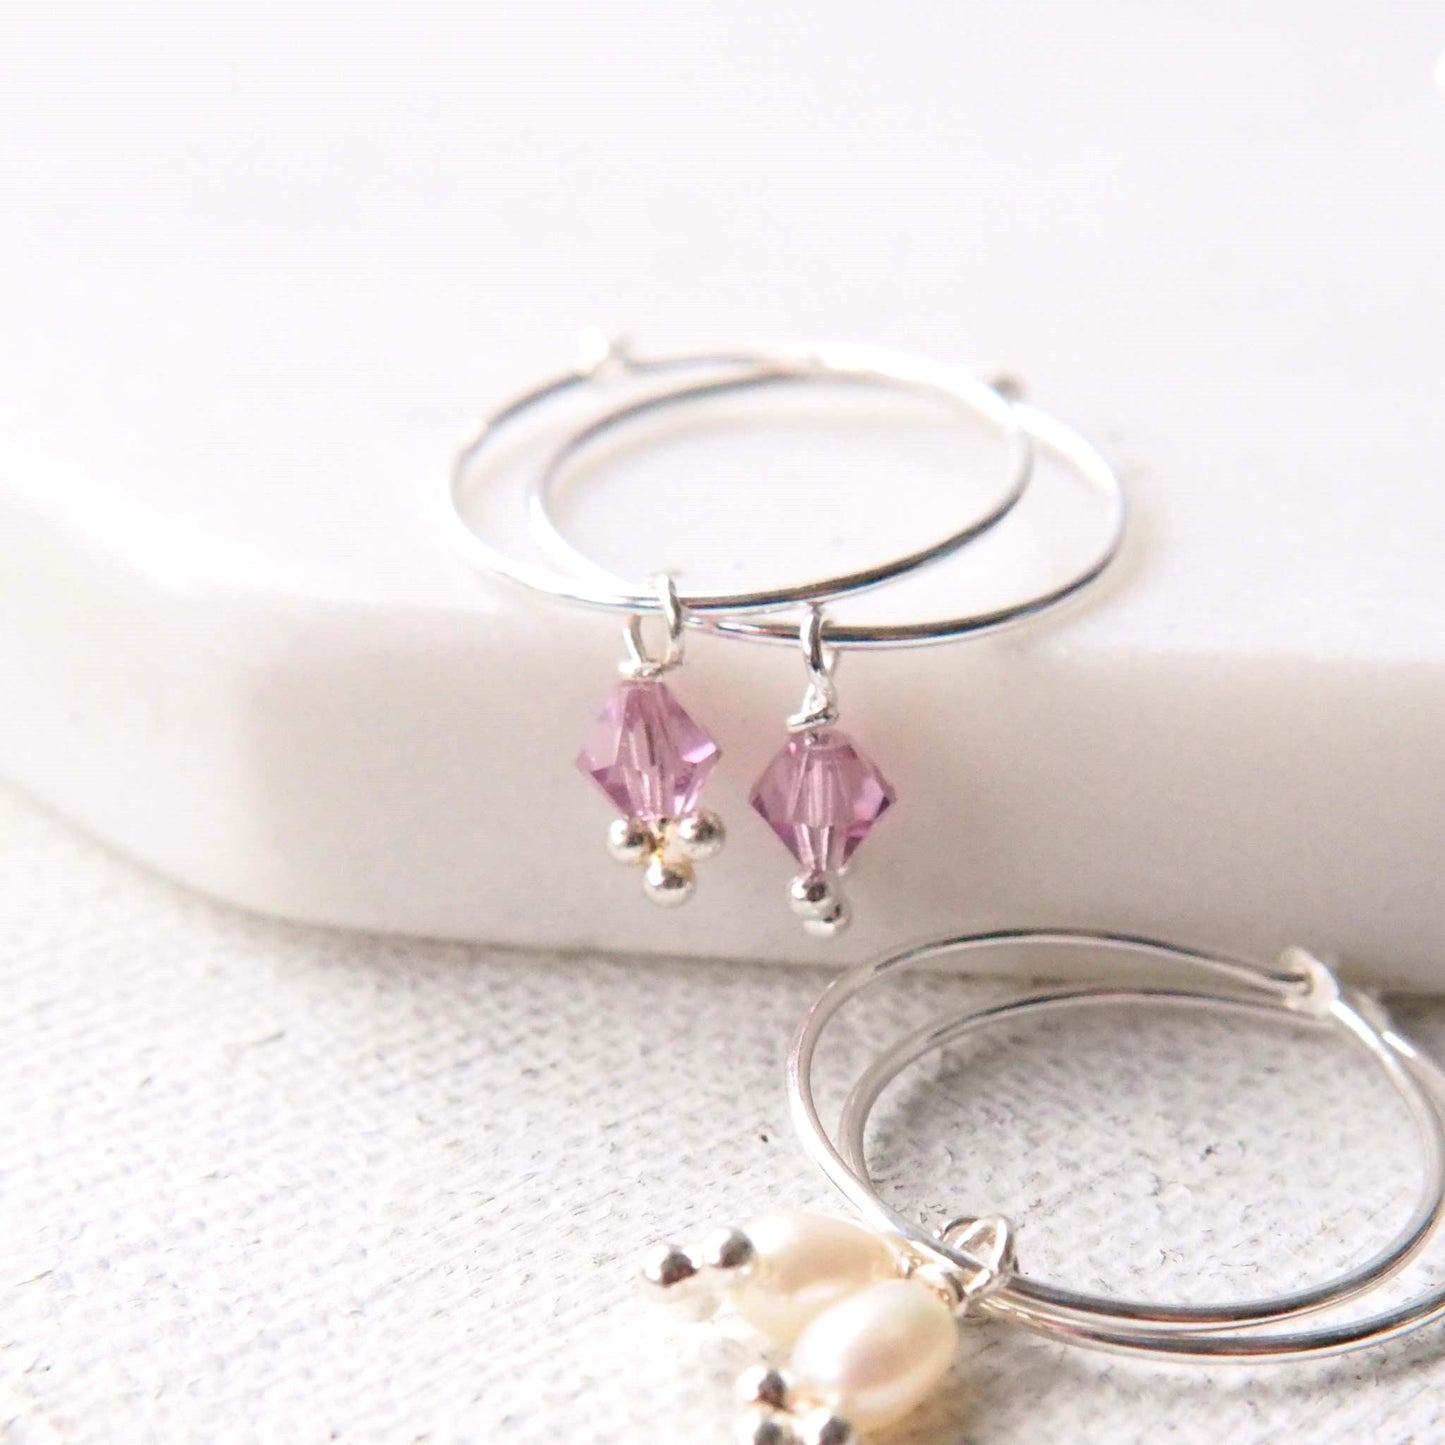 Alexandrite birthstone Hoops for June. Small dusky pink crystal and freshwater pearl charm drops on a thin sterling silver wire hoop. Handmade in Scotland by maram jewellery.